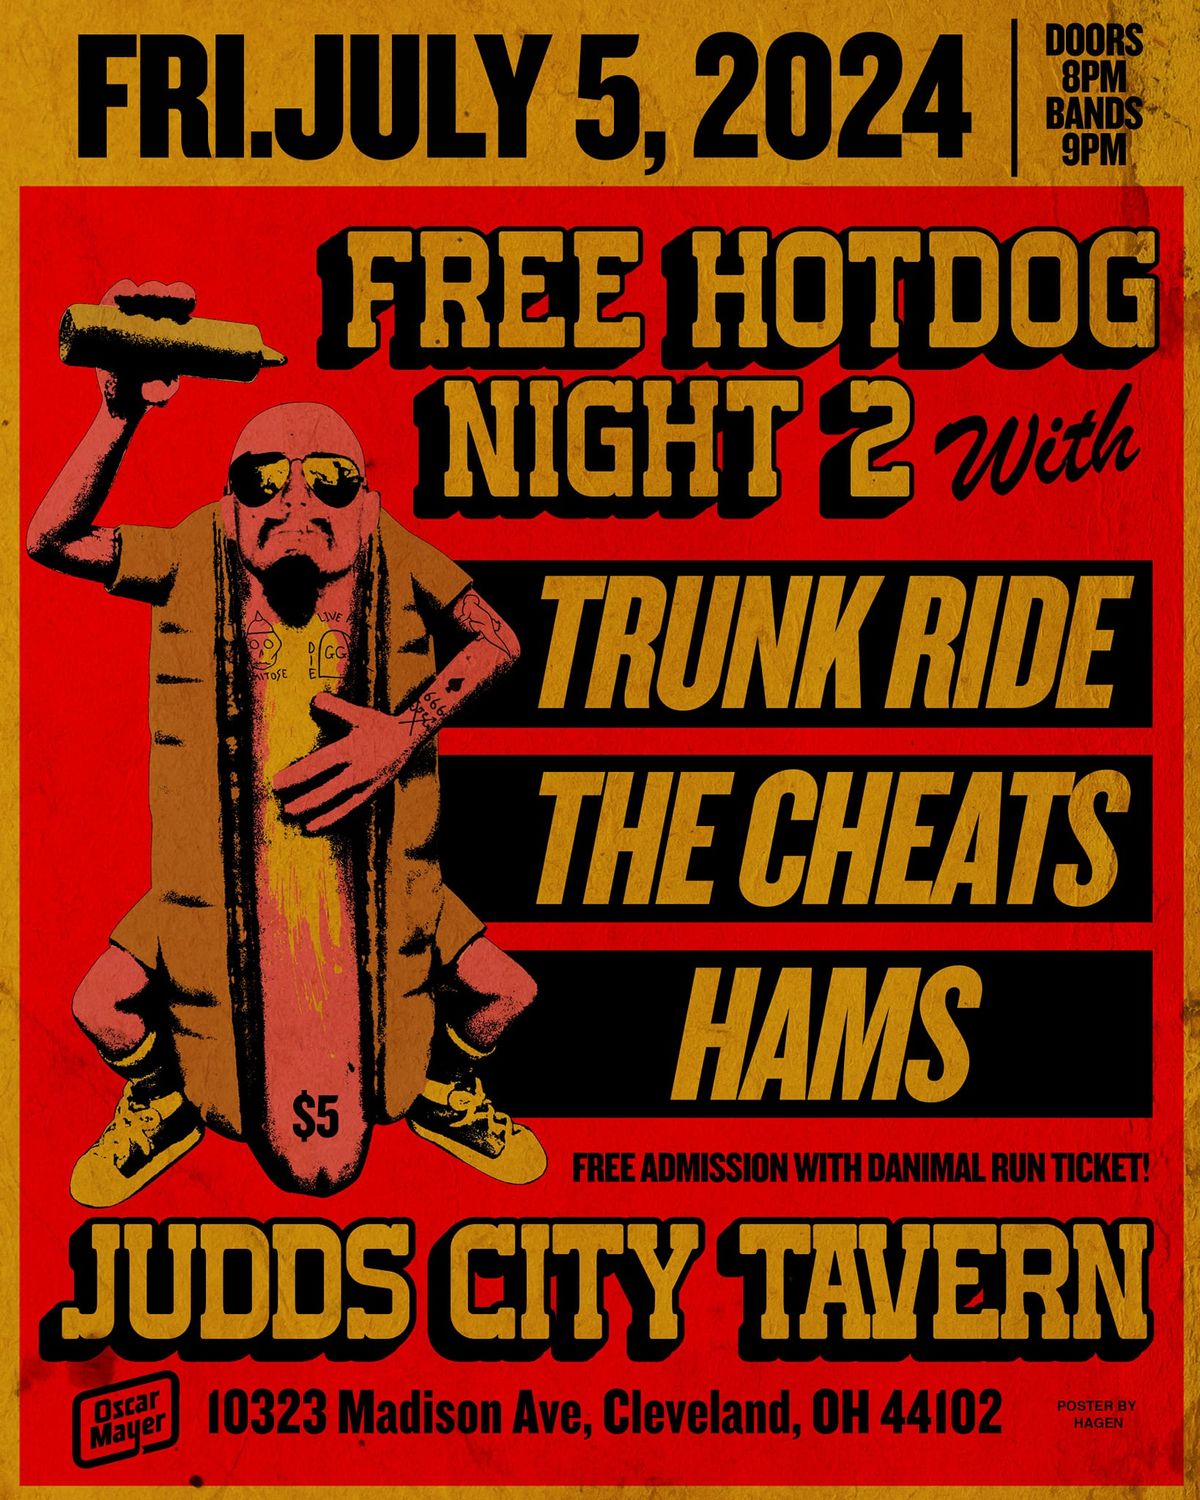 2nd Annual Free hot dog night at Judds City Tavern! featuring Trunk Ride, The Cheats, Hams